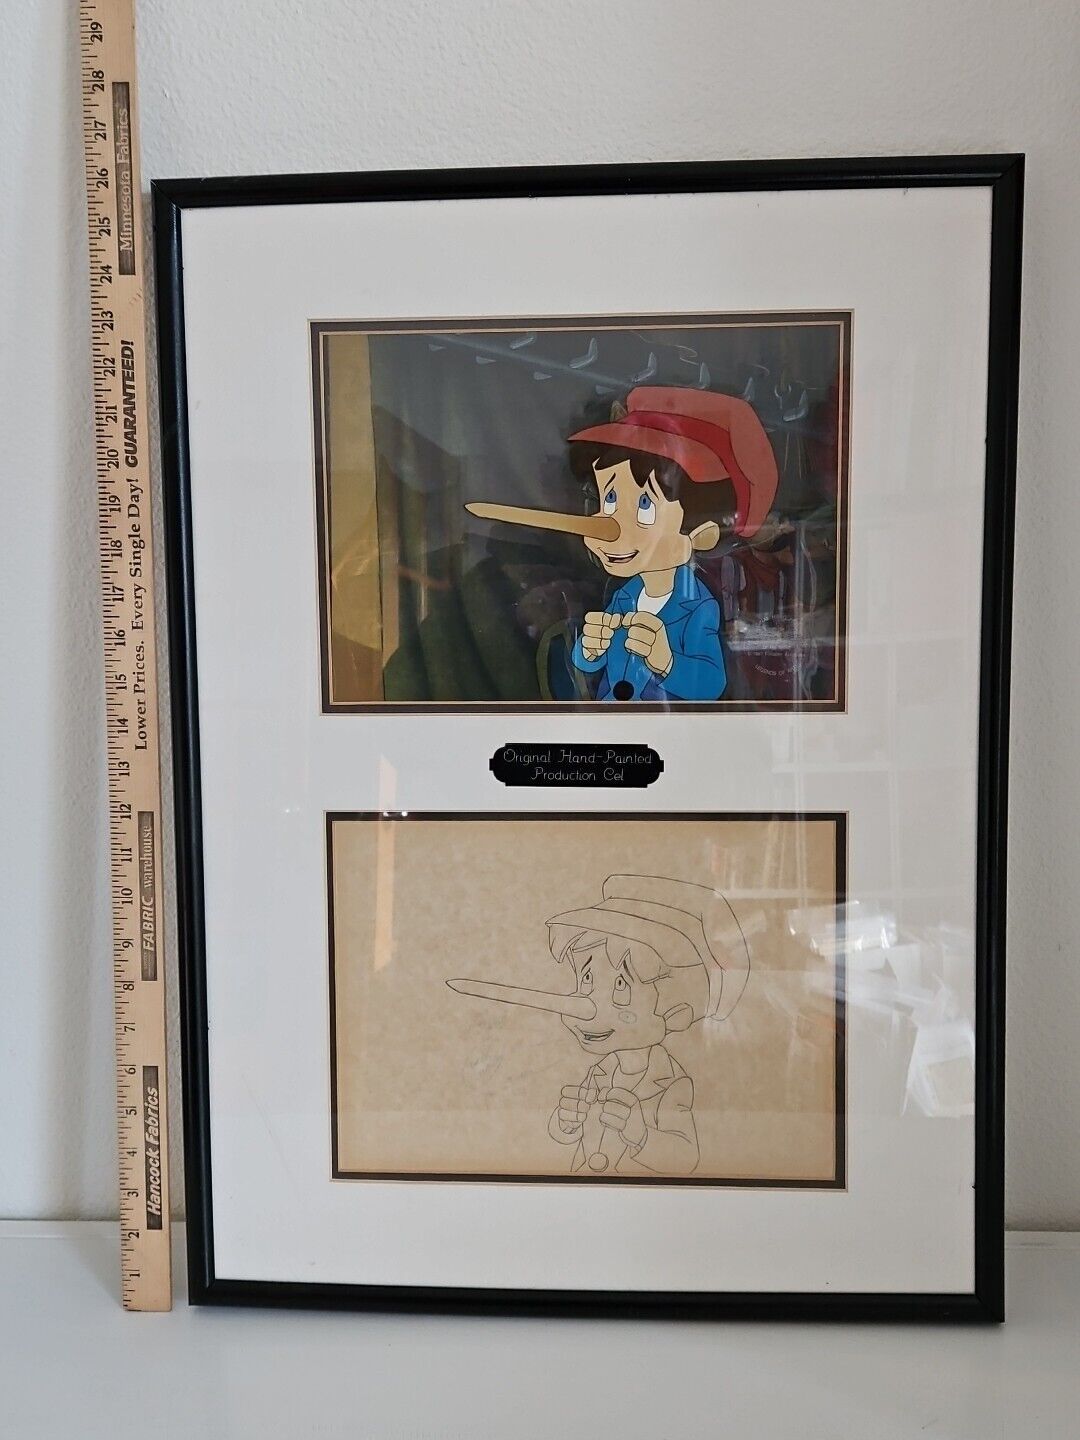 1987 Original Hand Painted Production Cel Drawing PINOCCHIO AND EMPEROR Cartoon